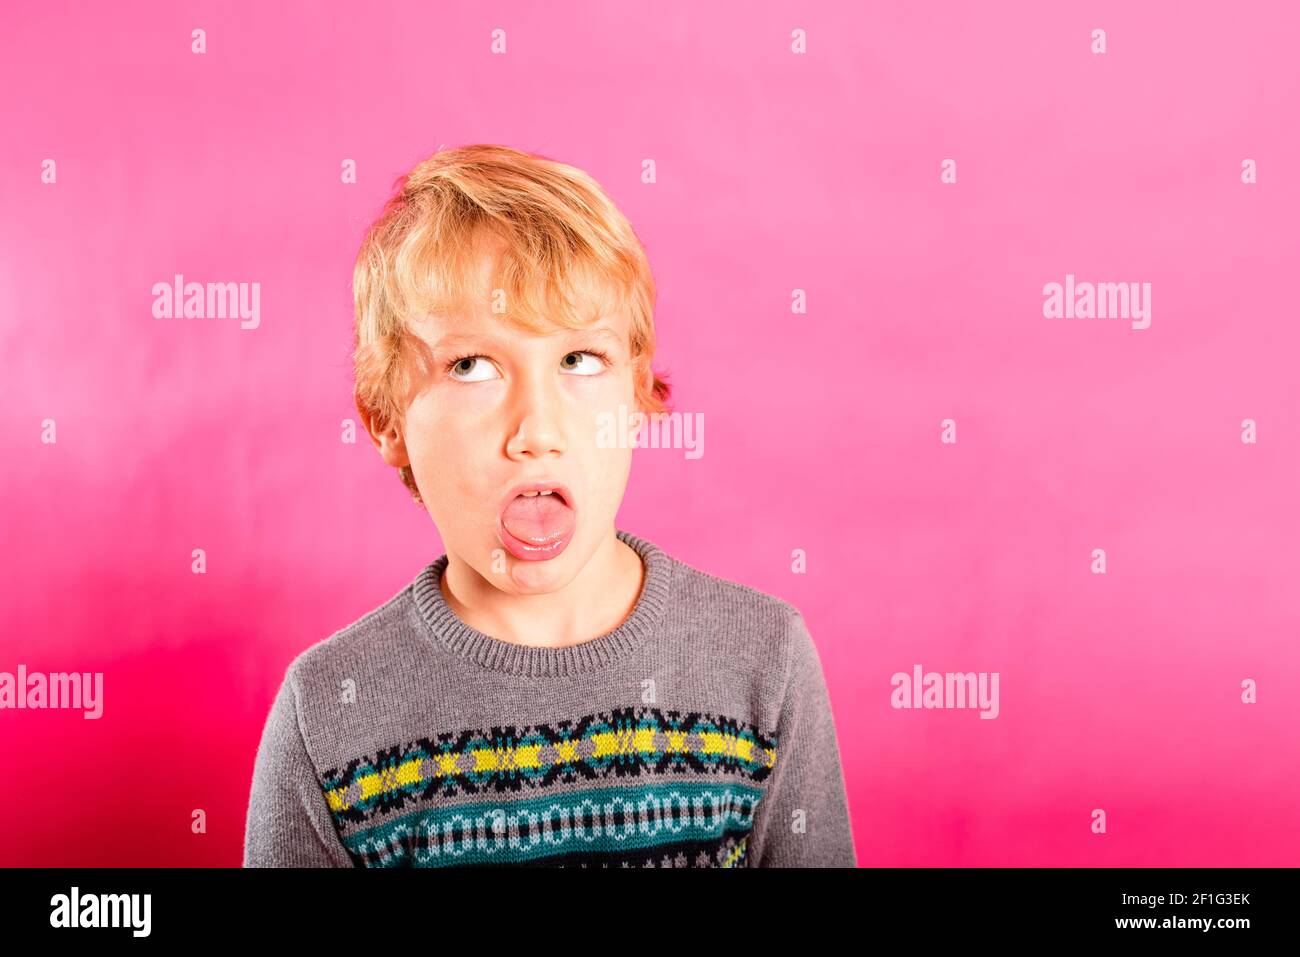 Young child boy making strange faces, rolling his eyes in a grotesque way. Stock Photo